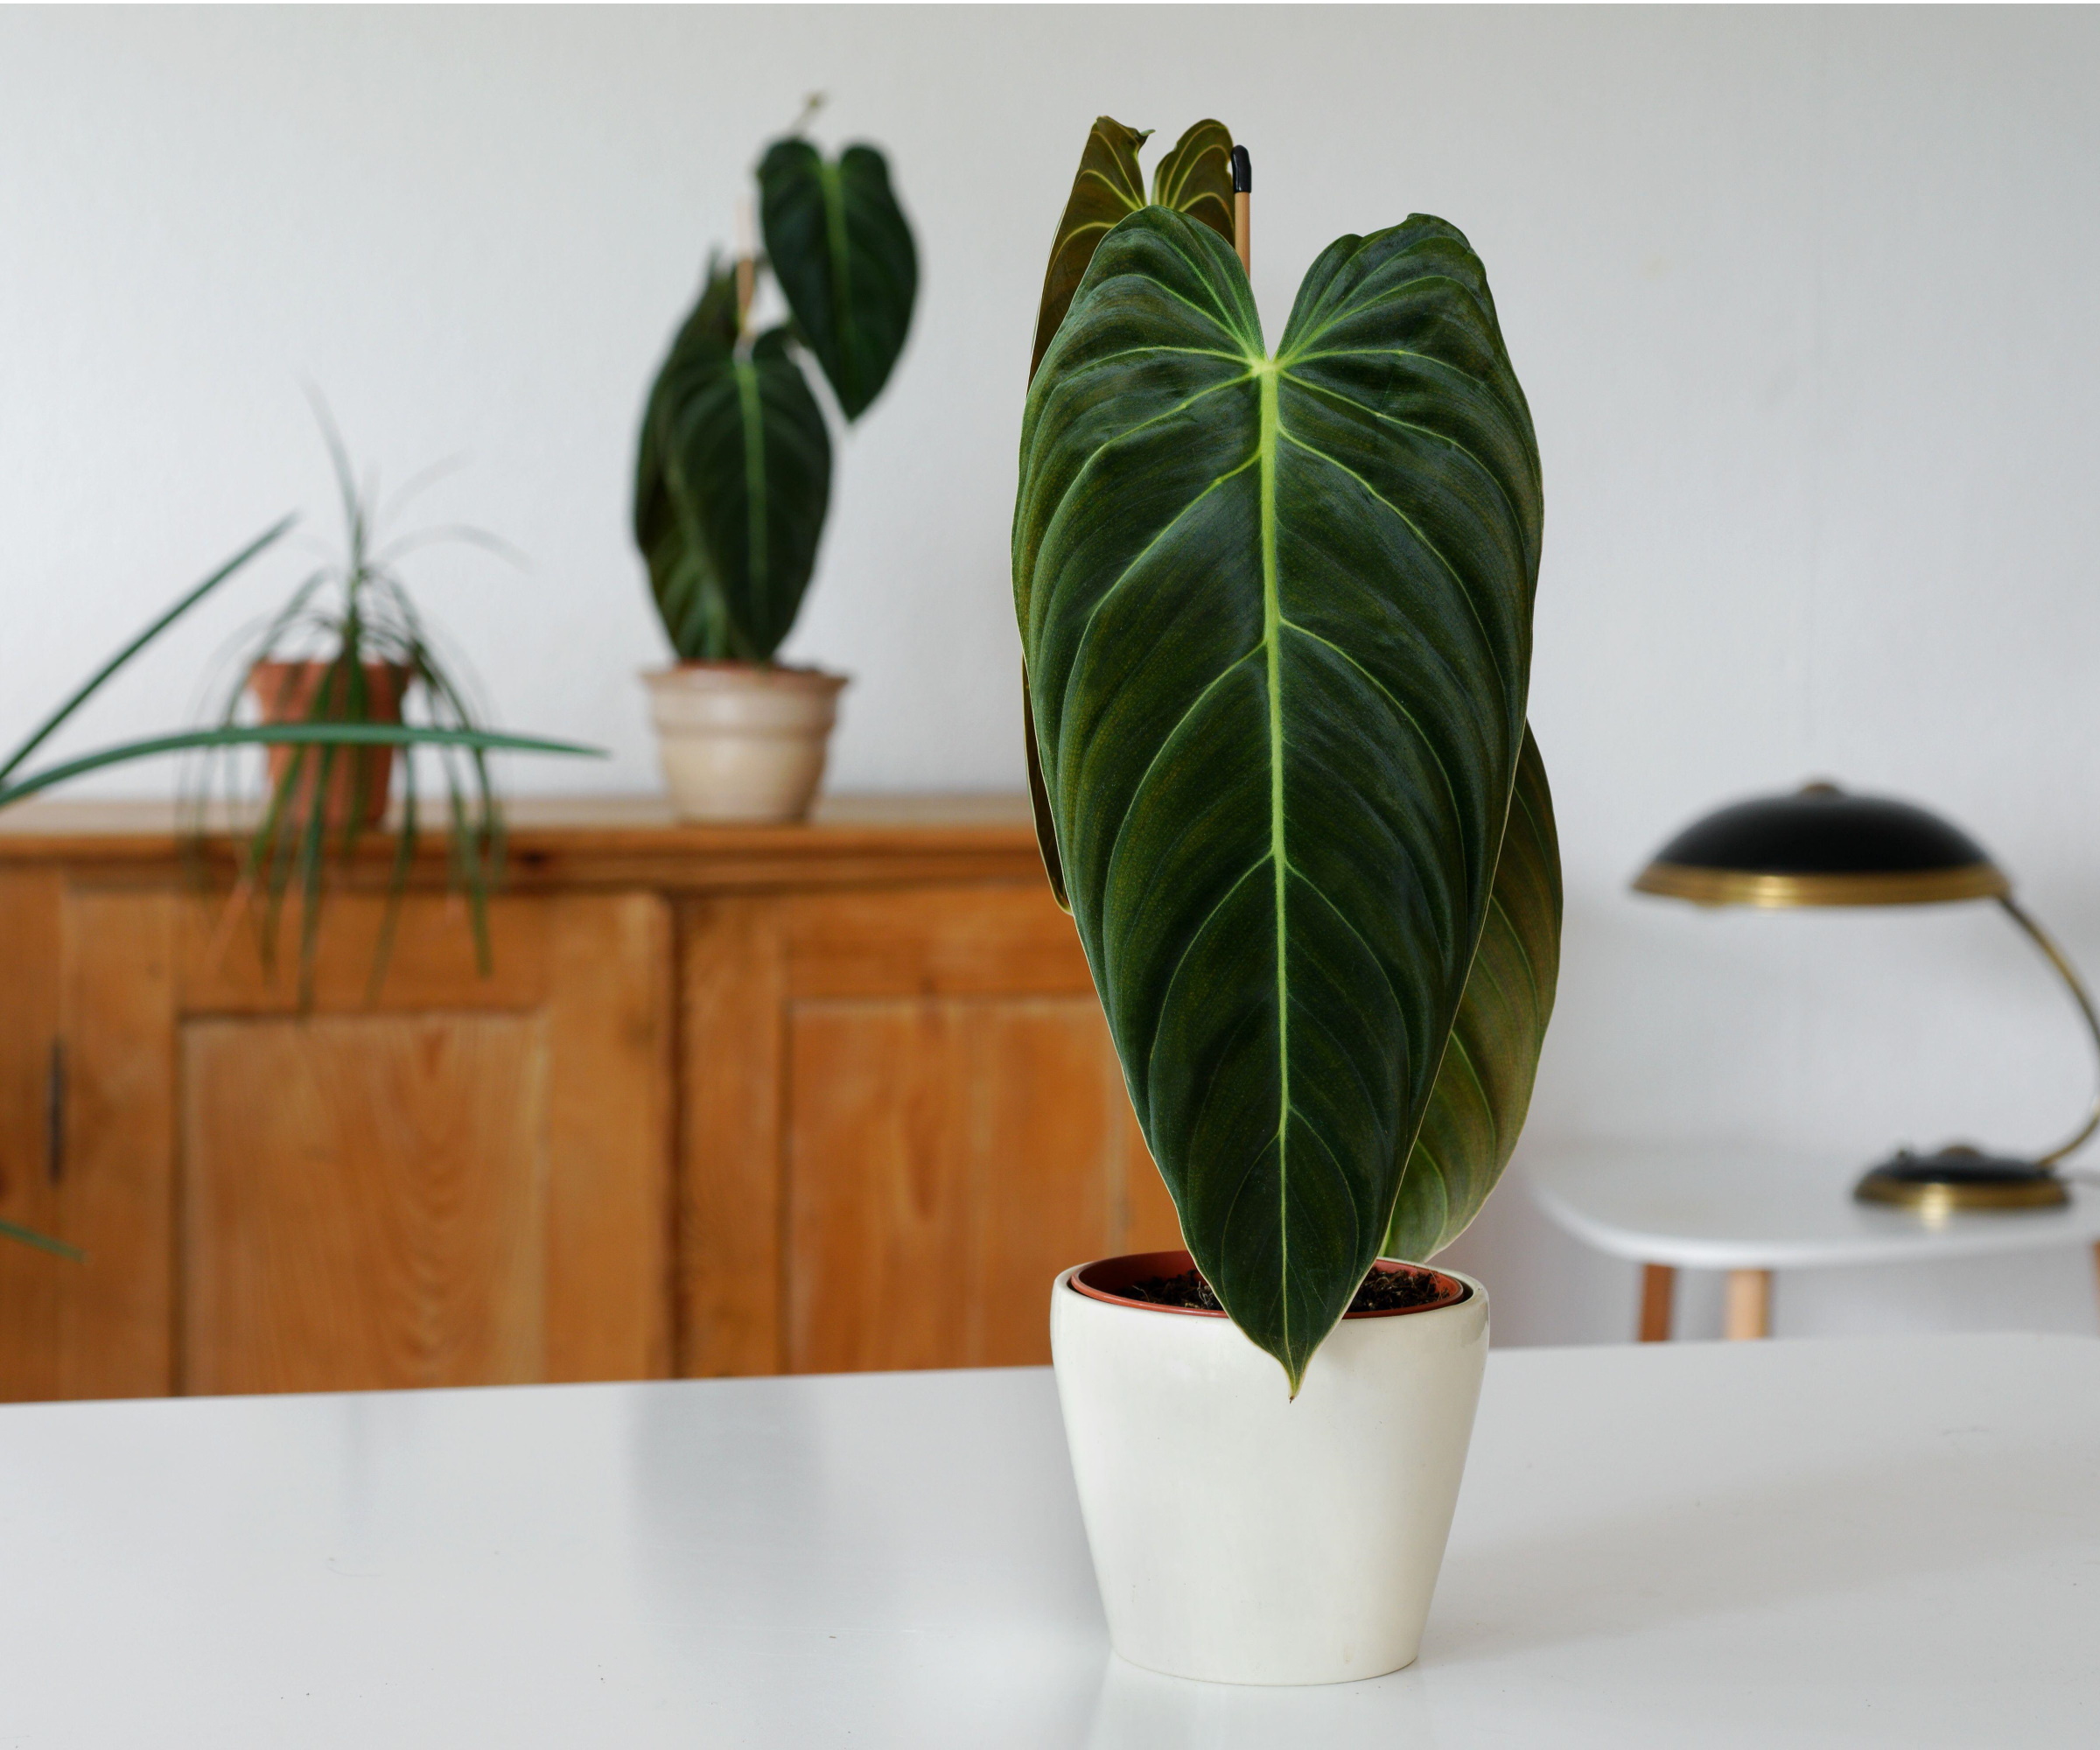 Black-gold philodendron